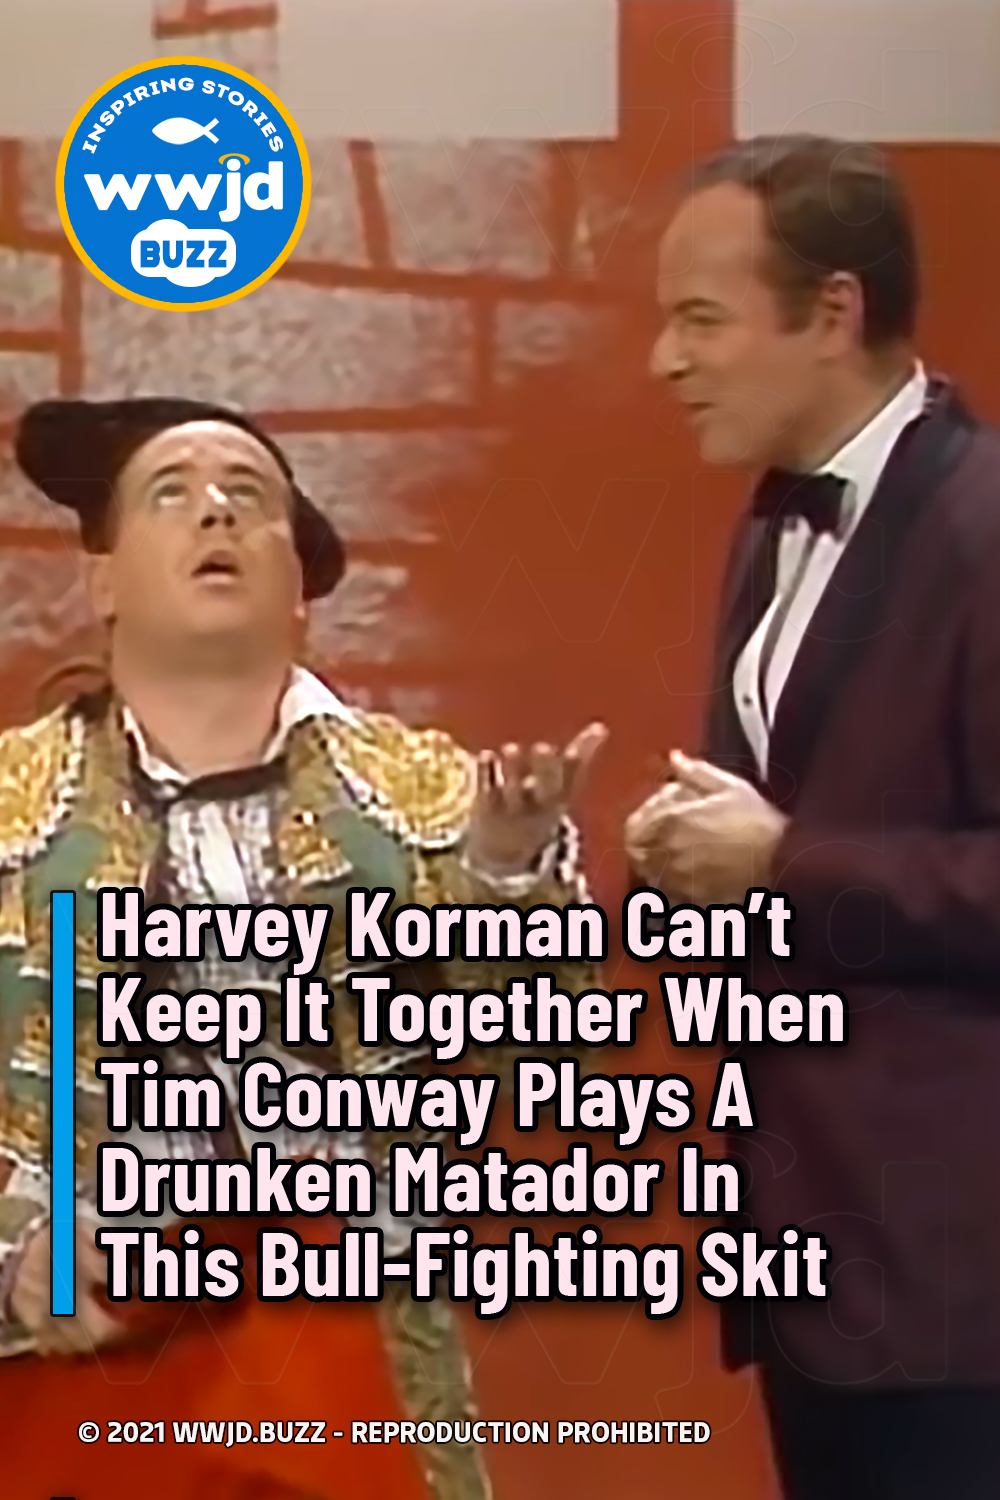 Harvey Korman Can’t Keep It Together When Tim Conway Plays A Drunken Matador In This Bull-Fighting Skit